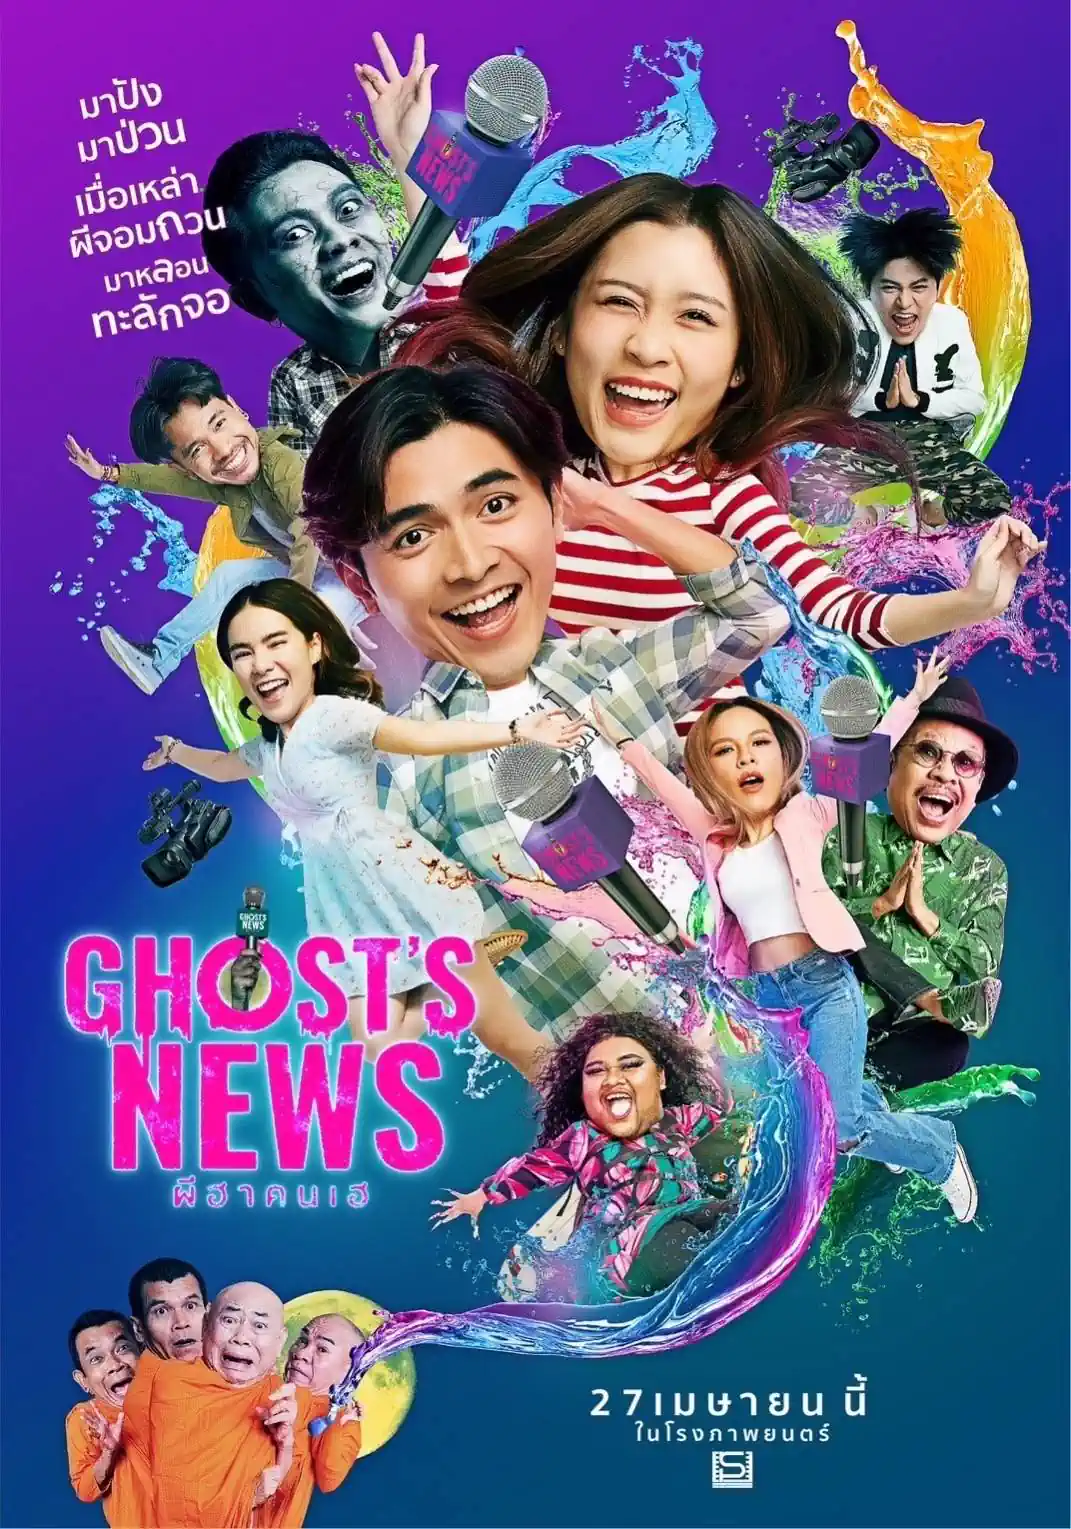 Poster ‘GHOSTS NEWS ผีฮาคนเฮ w